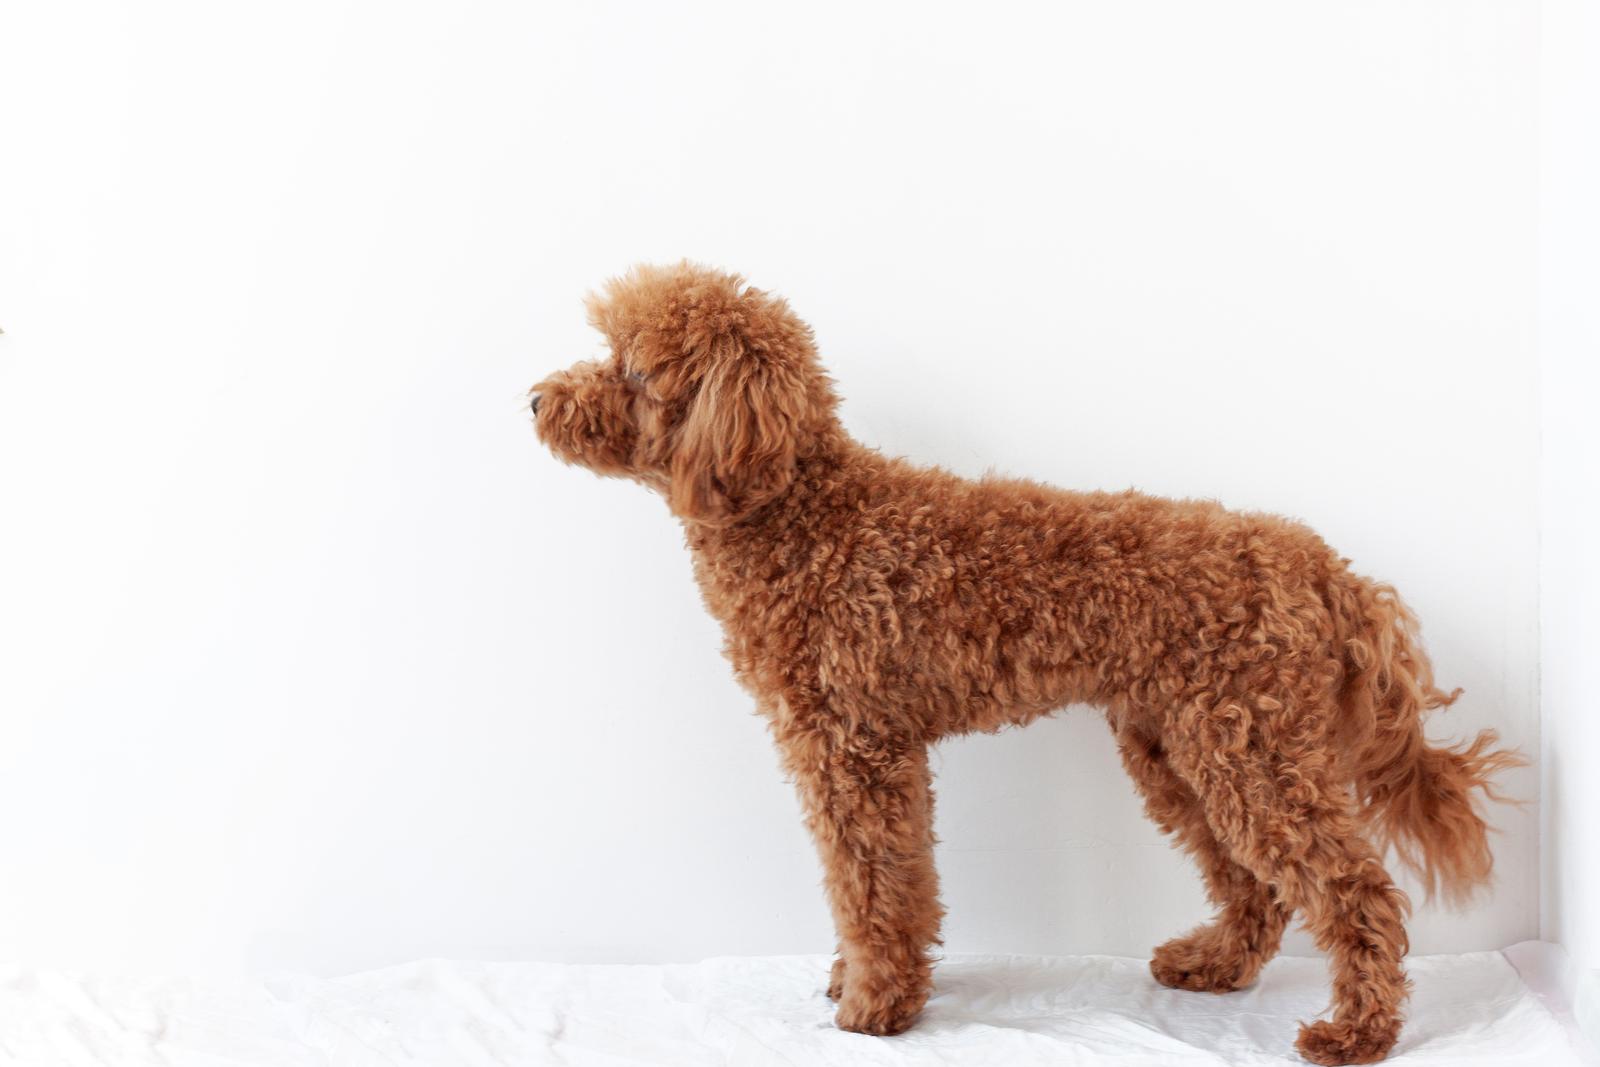 Can a standard poodle live in an apartment